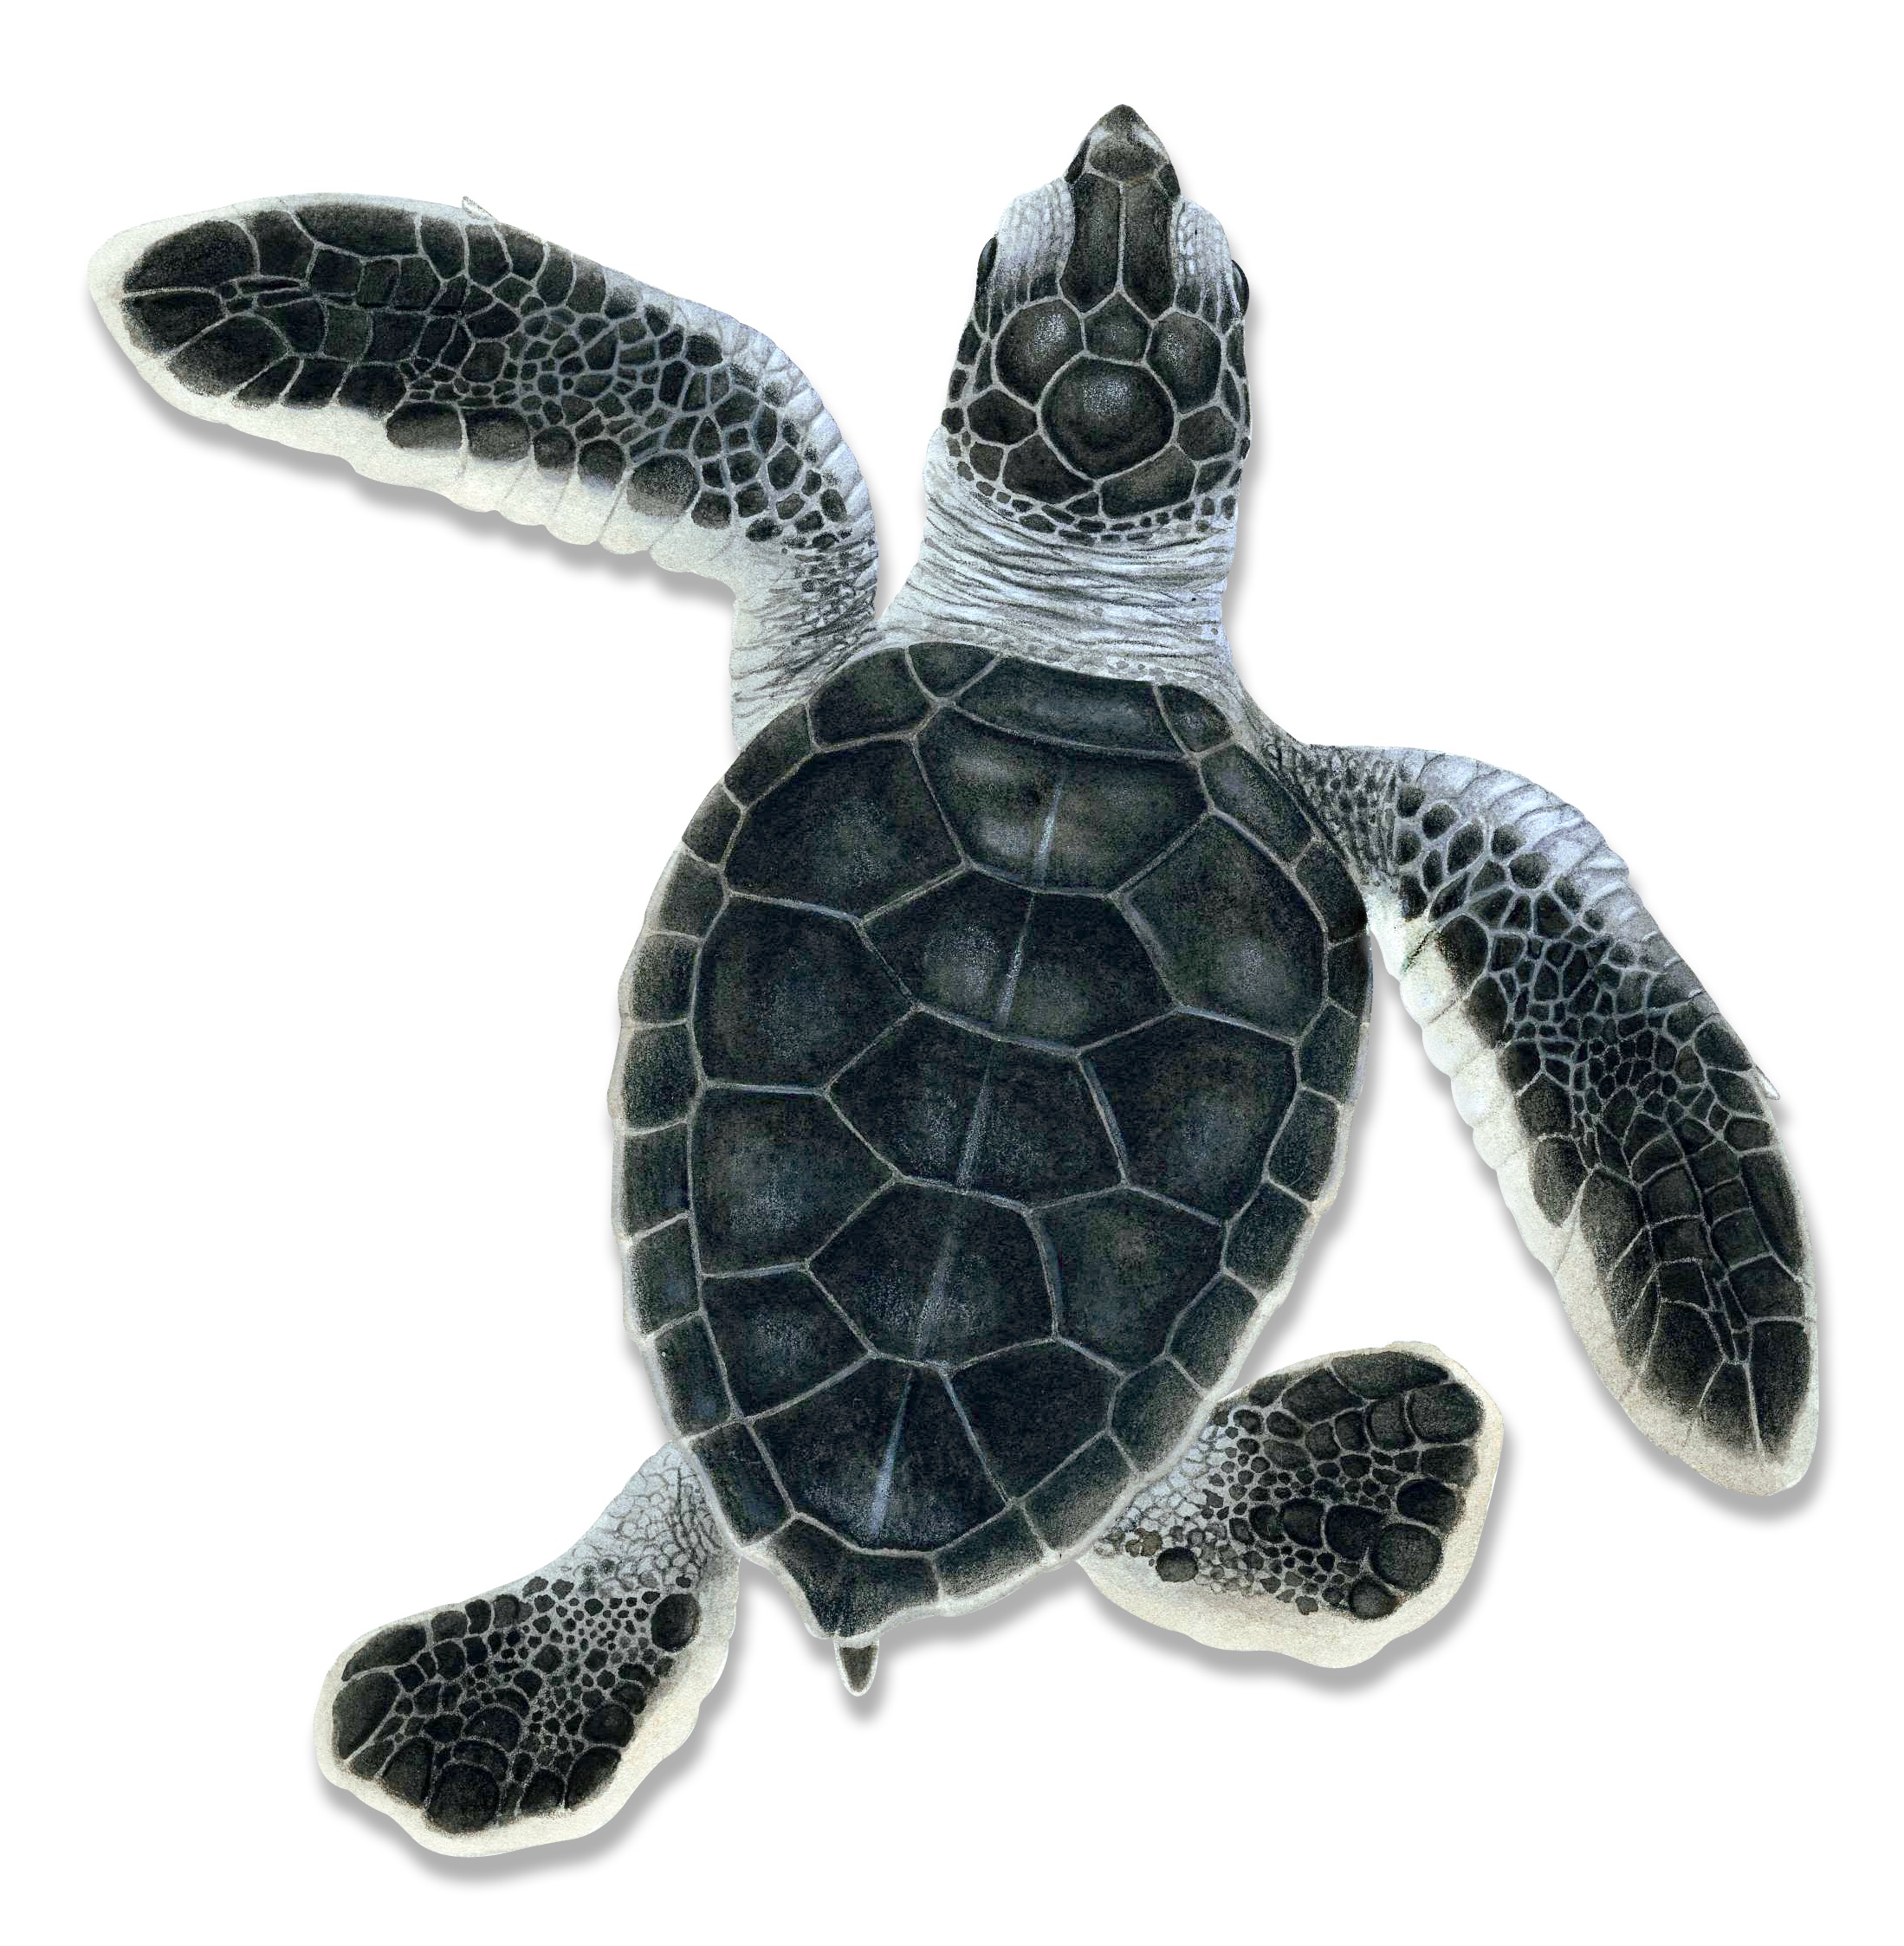  Illustration of a hatchling green turtle. © Dawn Witherington 